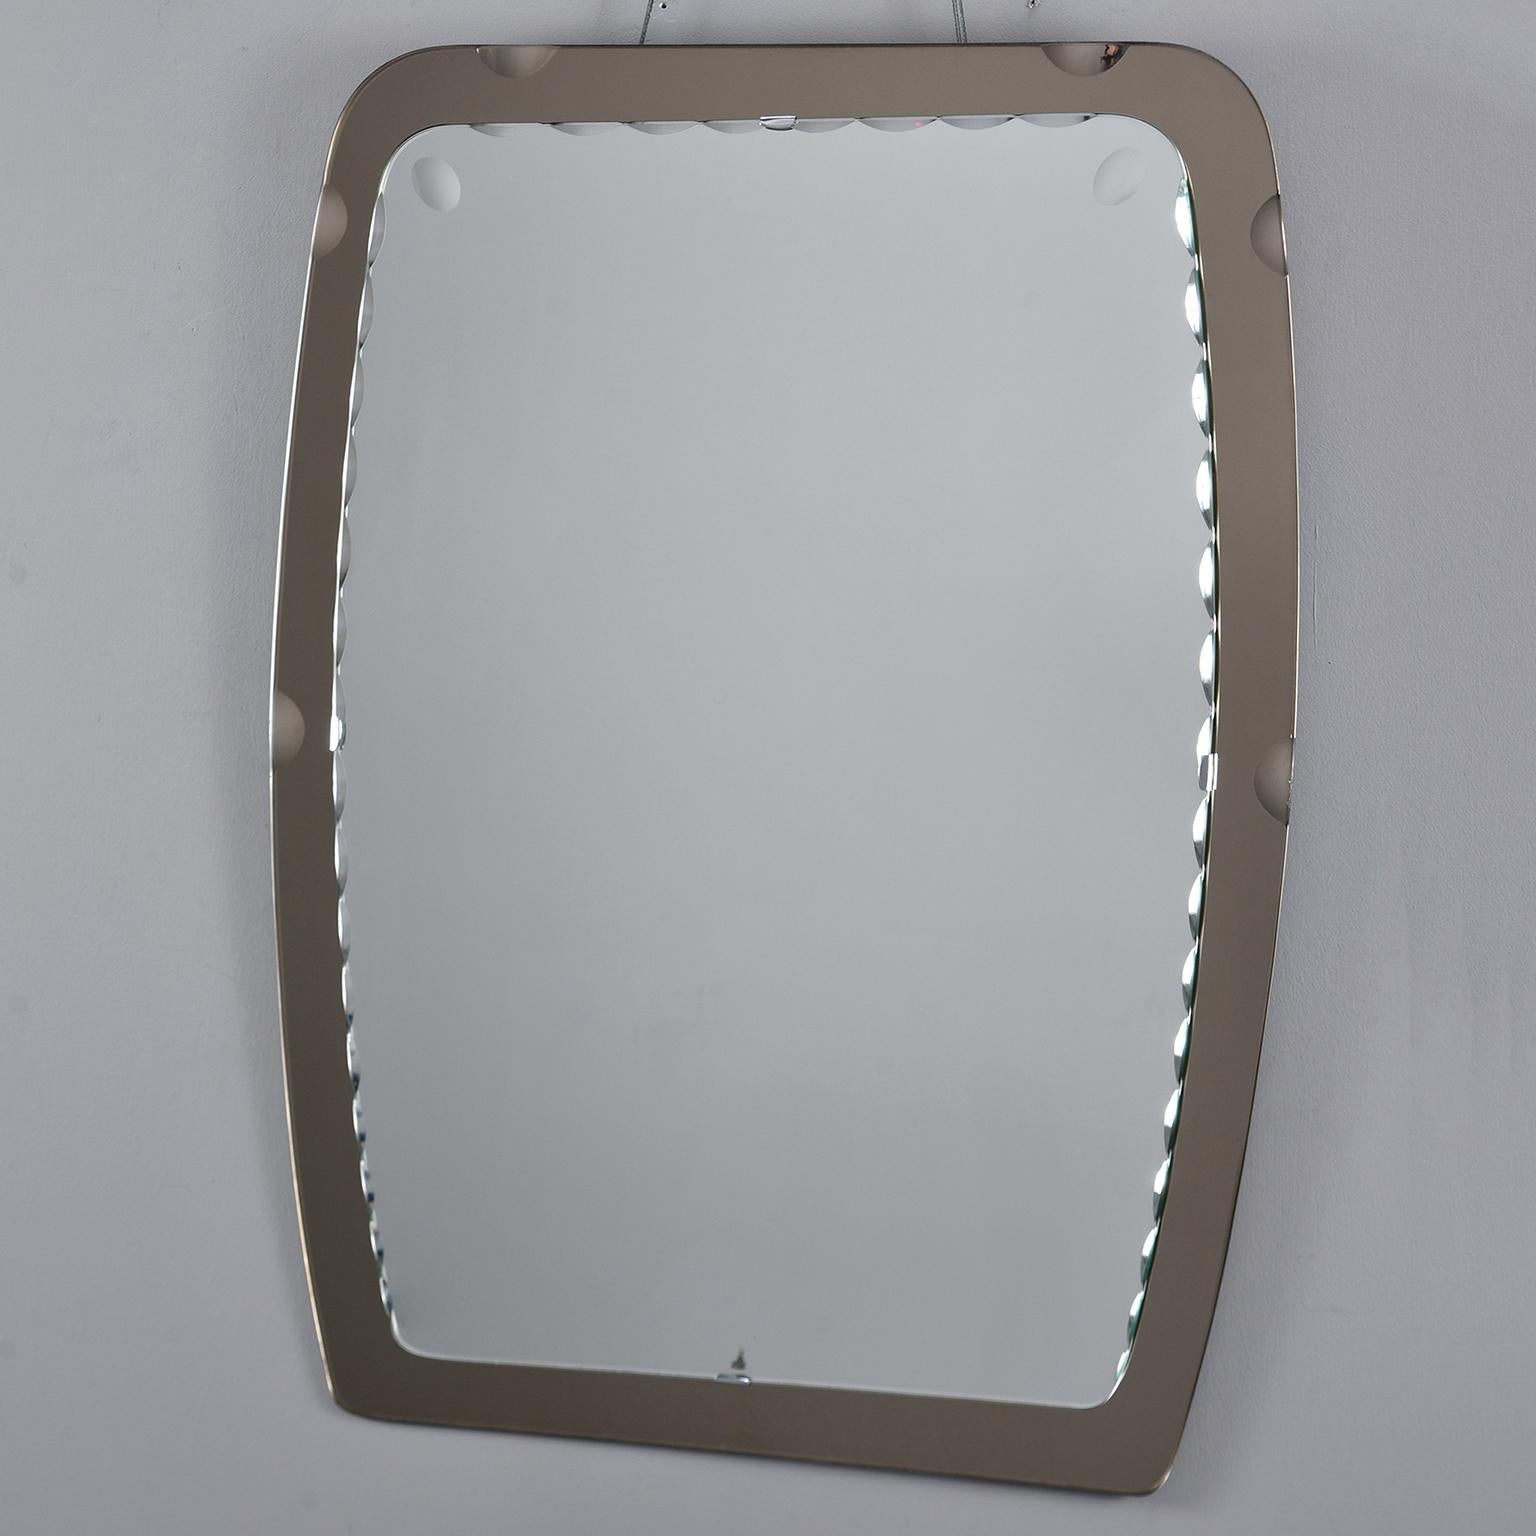 Italian mirror by crystal Arte has a rectangular shape with rounded corners, a scallop edge mirror with smoky gray art glass frame, circa 1970s. Metal hanger on the back.